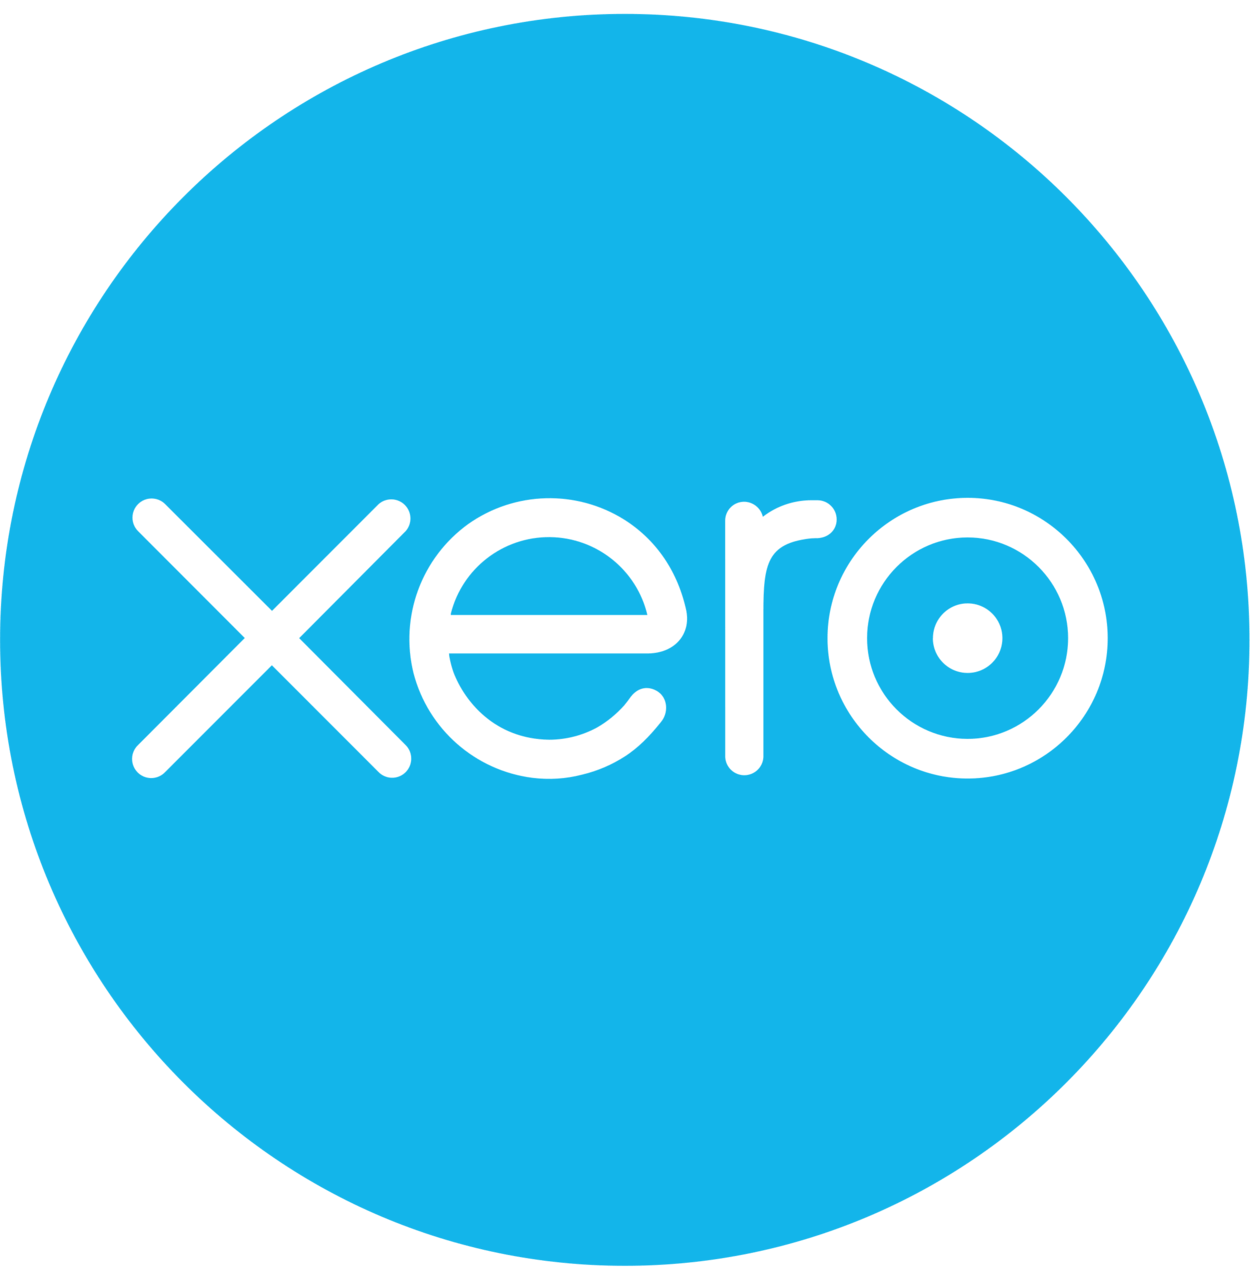 Apex integrates with Xero accounting